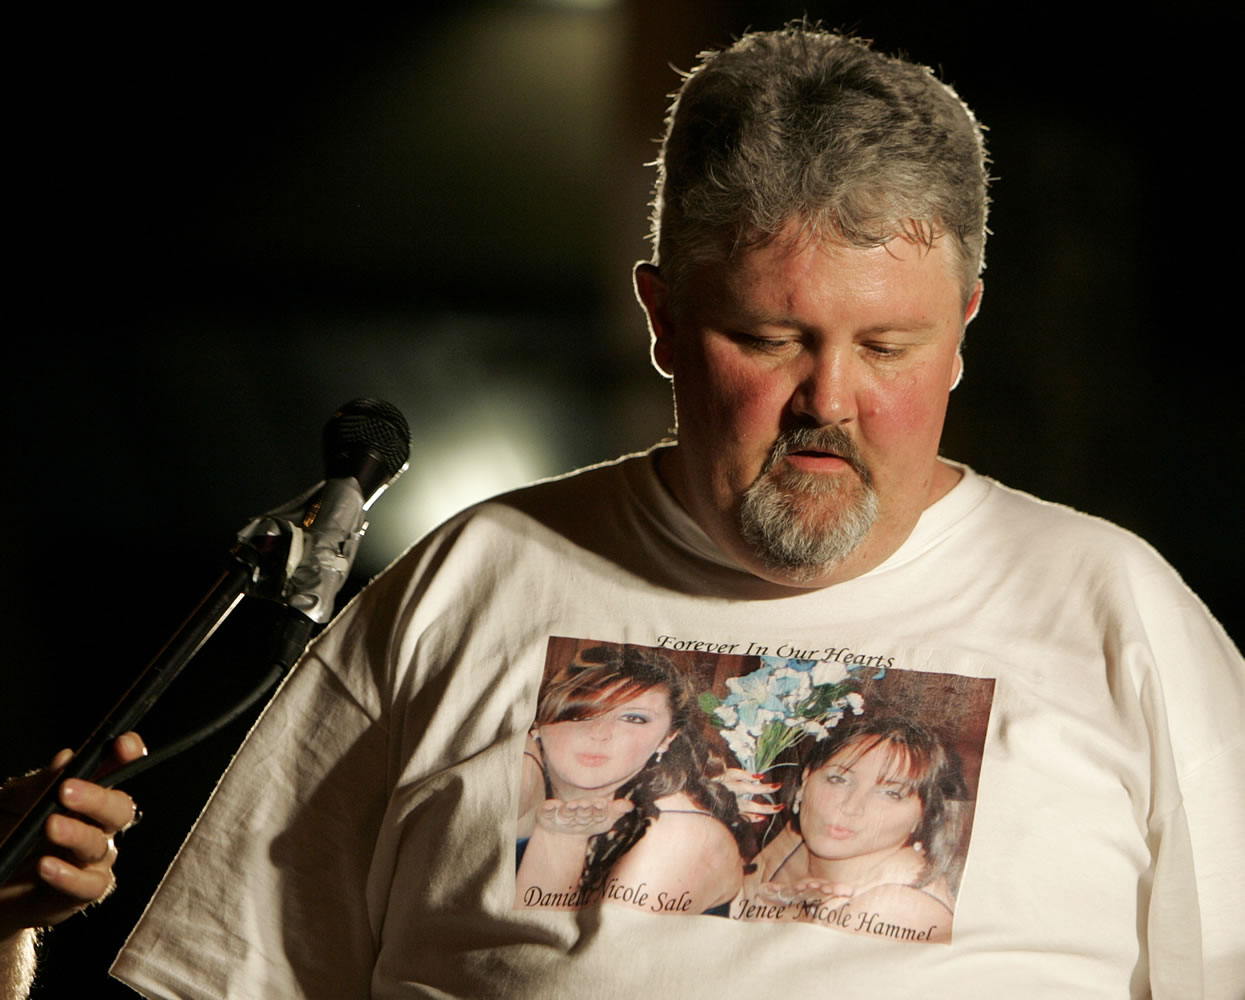 David Sale speaks at a memorial of the one-year anniversary of Vancouver resident Danielle Sale's death in 2010.